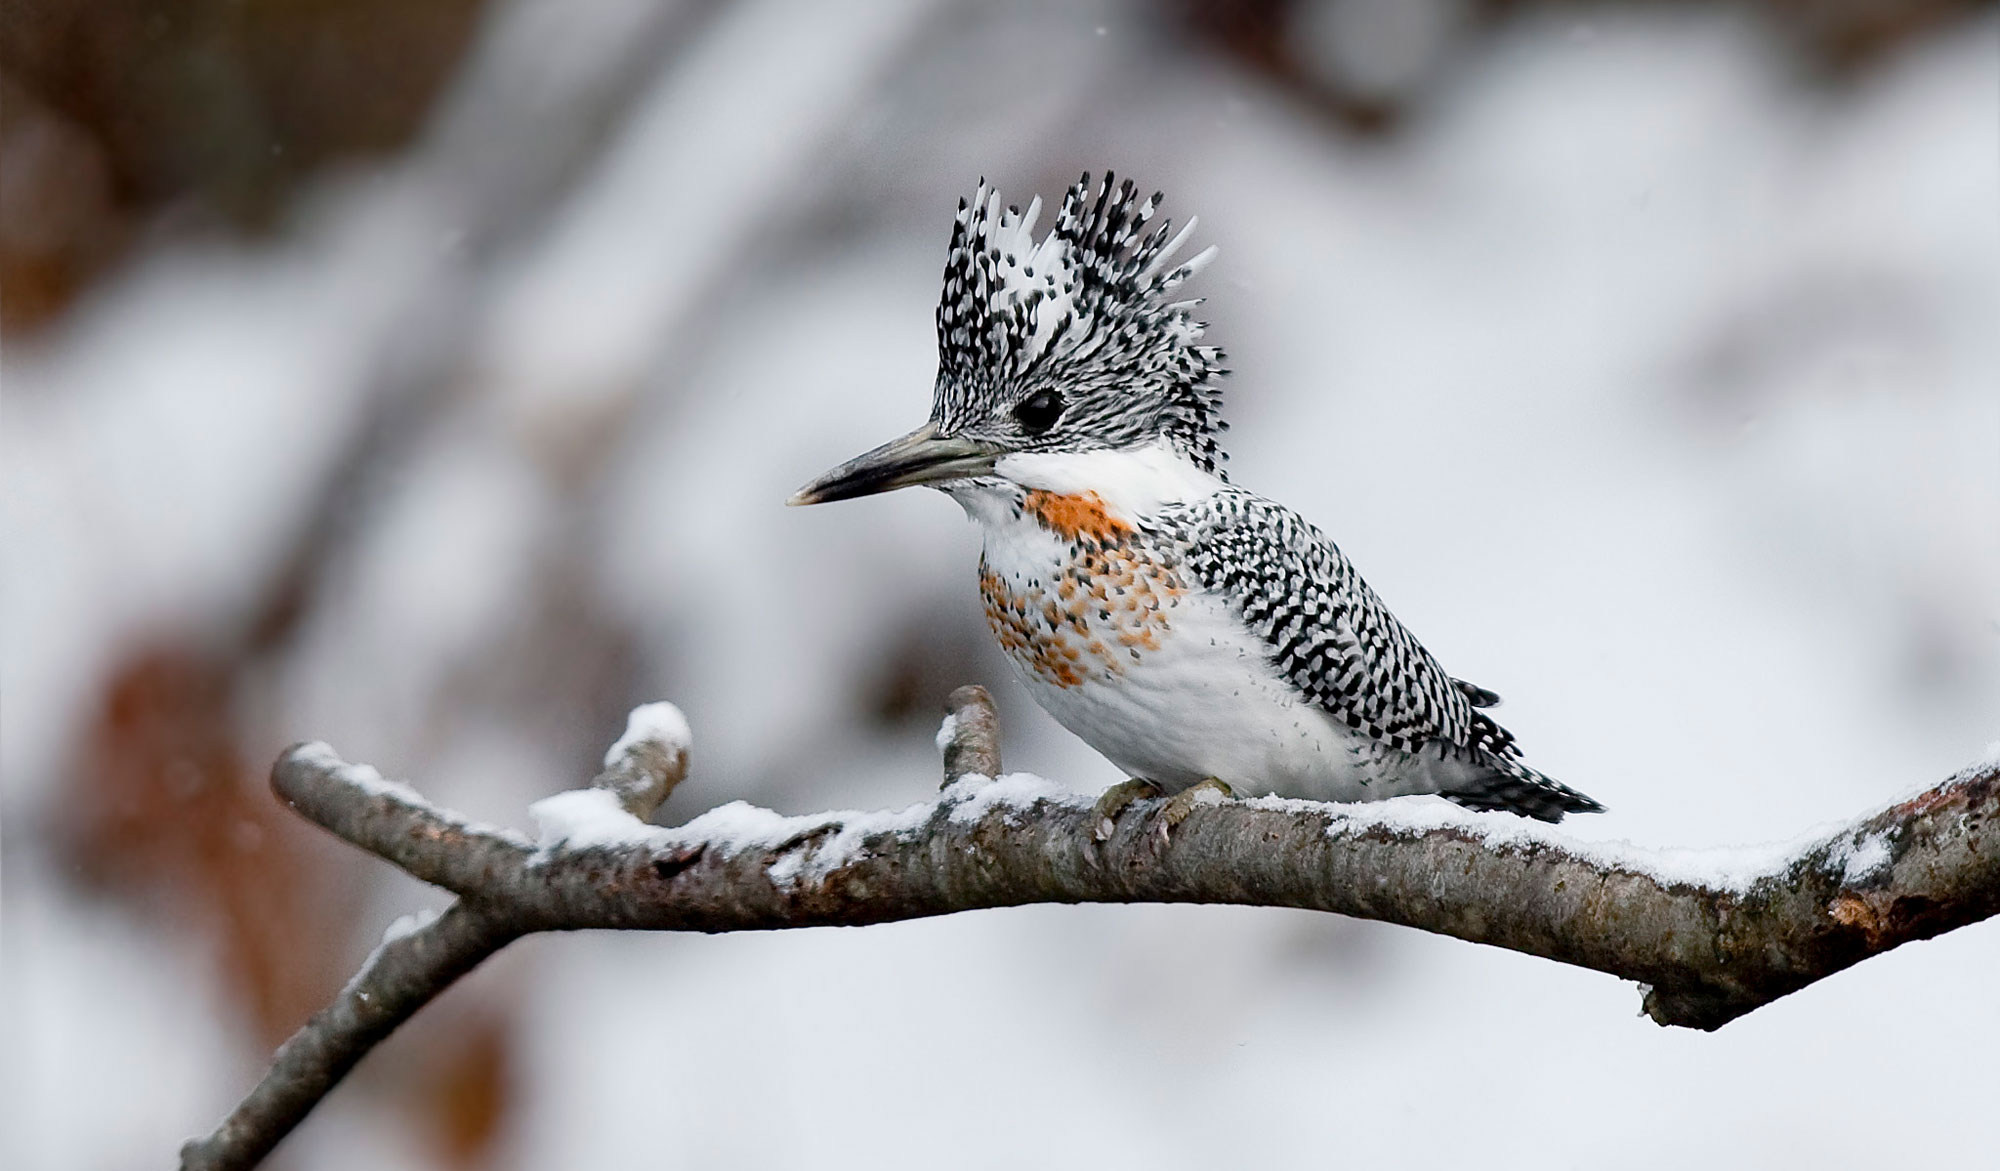 Photograph of a crested kingfisher sitting on a snowy branch. The photo shows a crested bird with a black-and-white specked head and wings and a white breast speckled with orange and black.